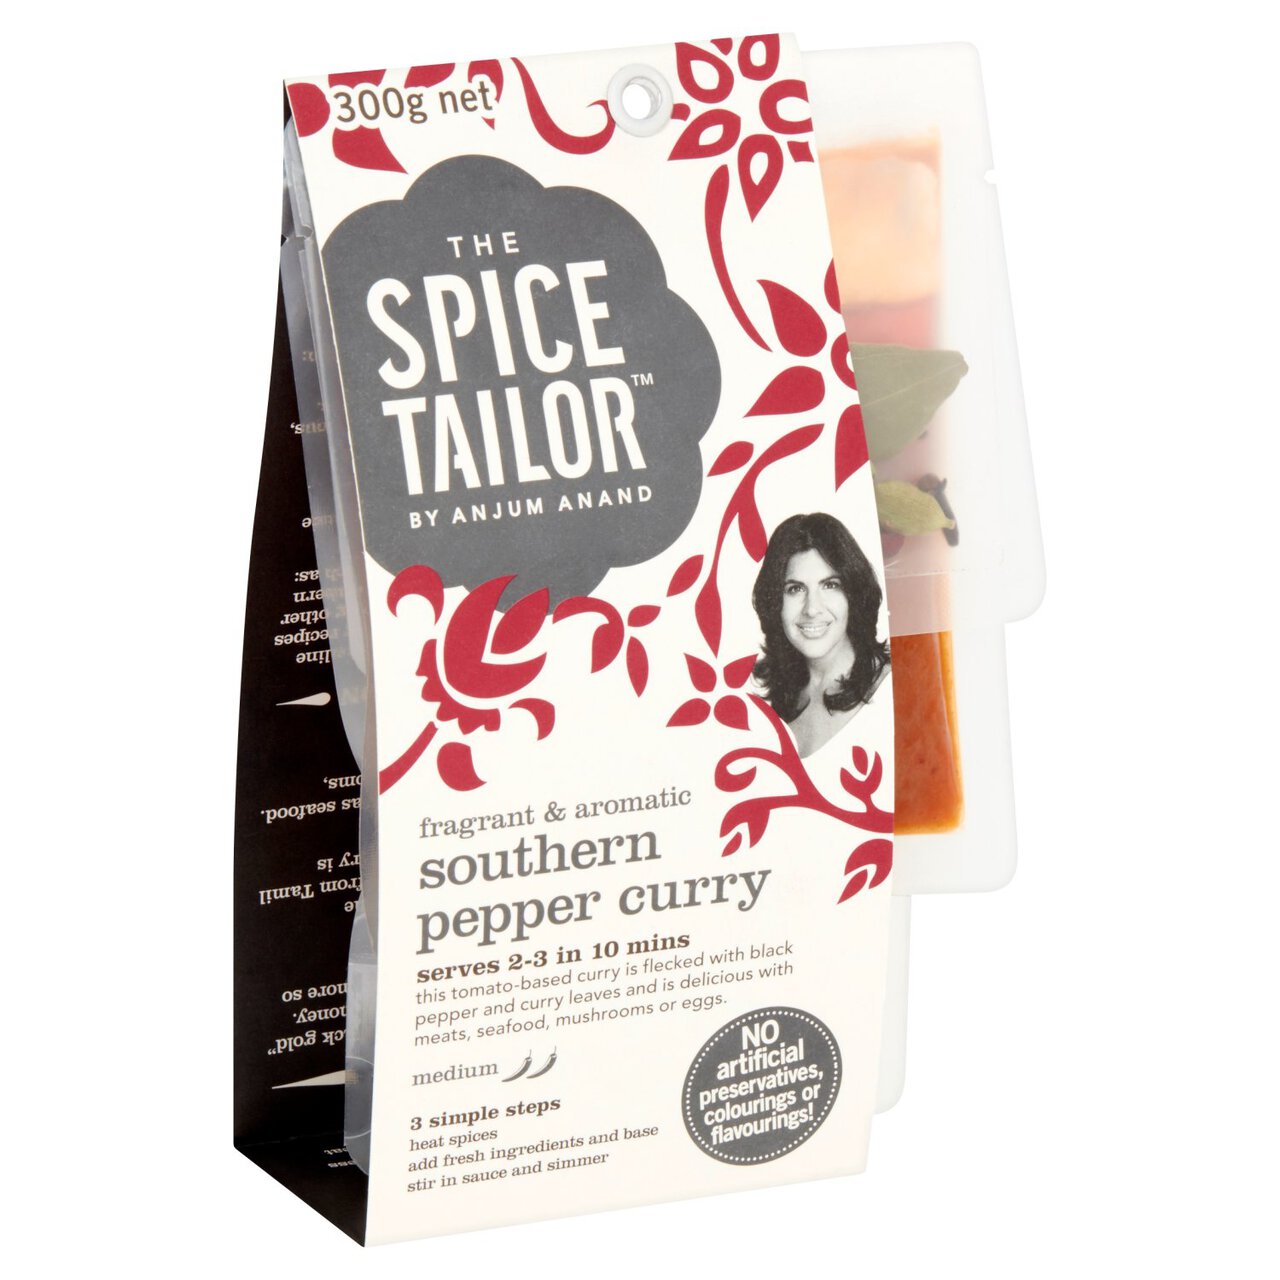 The Spice Tailor Southern Pepper Curry Kit 300g